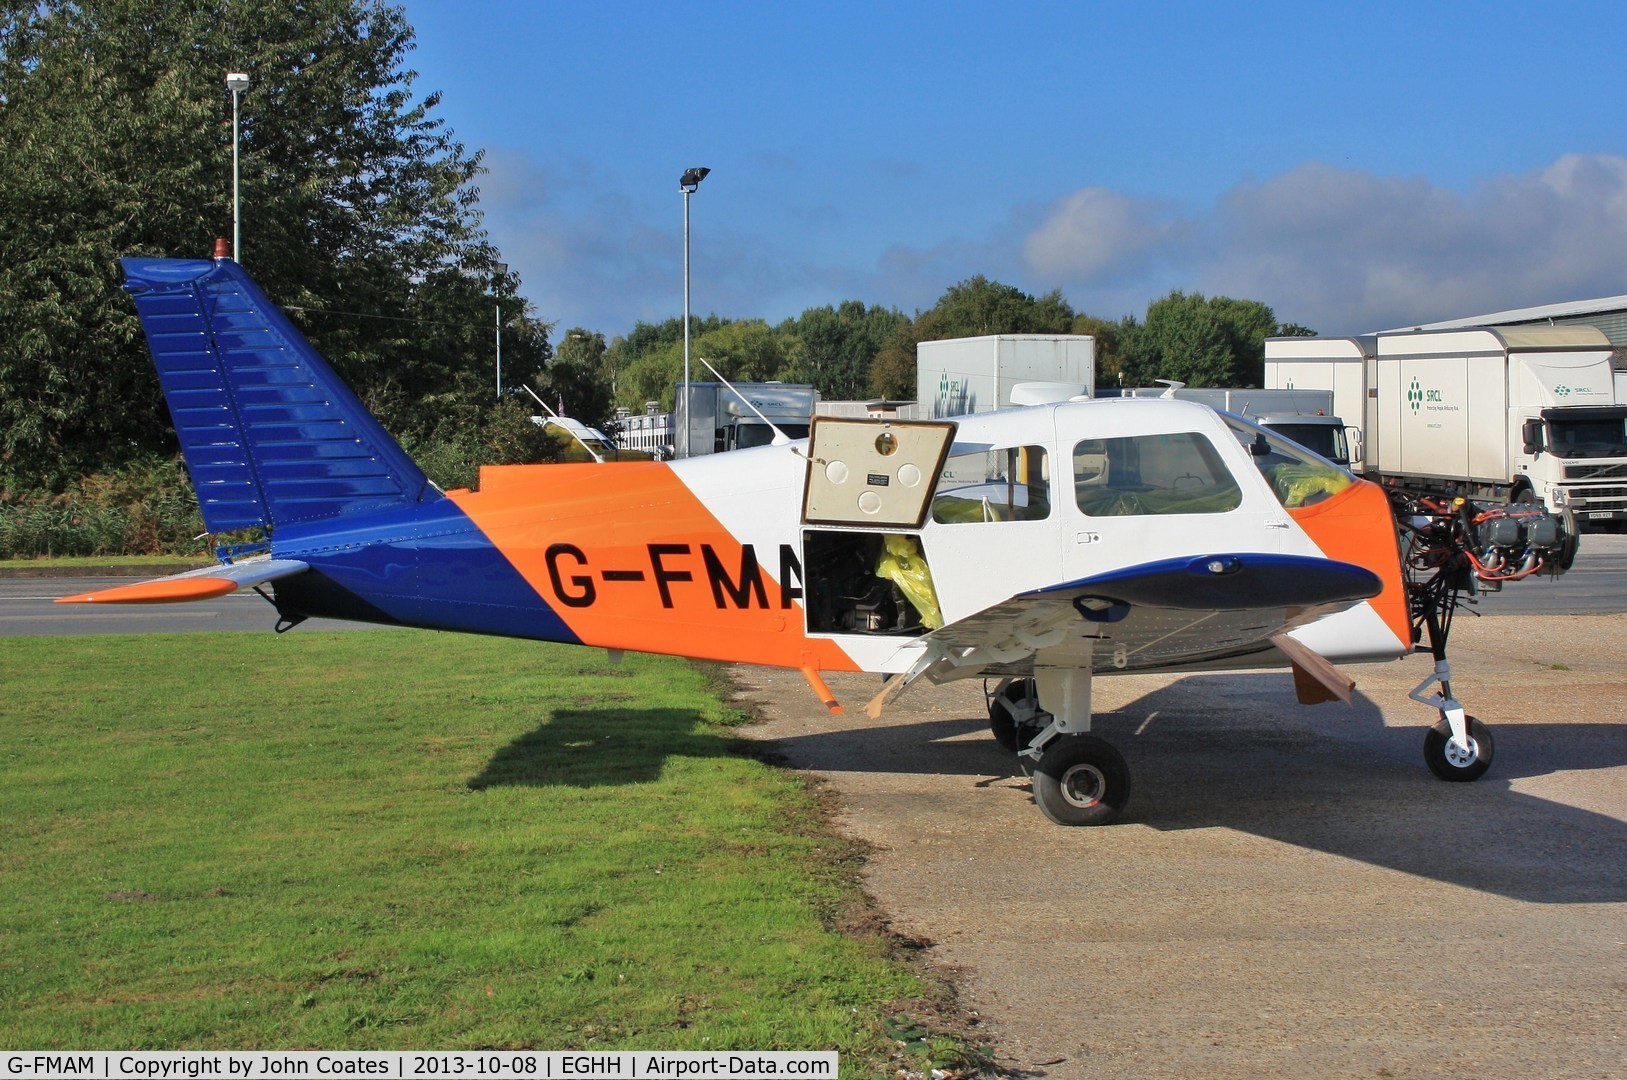 G-FMAM, 1973 Piper PA-28-151 Cherokee Warrior C/N 28-7415056, Awaiting completion after repaint